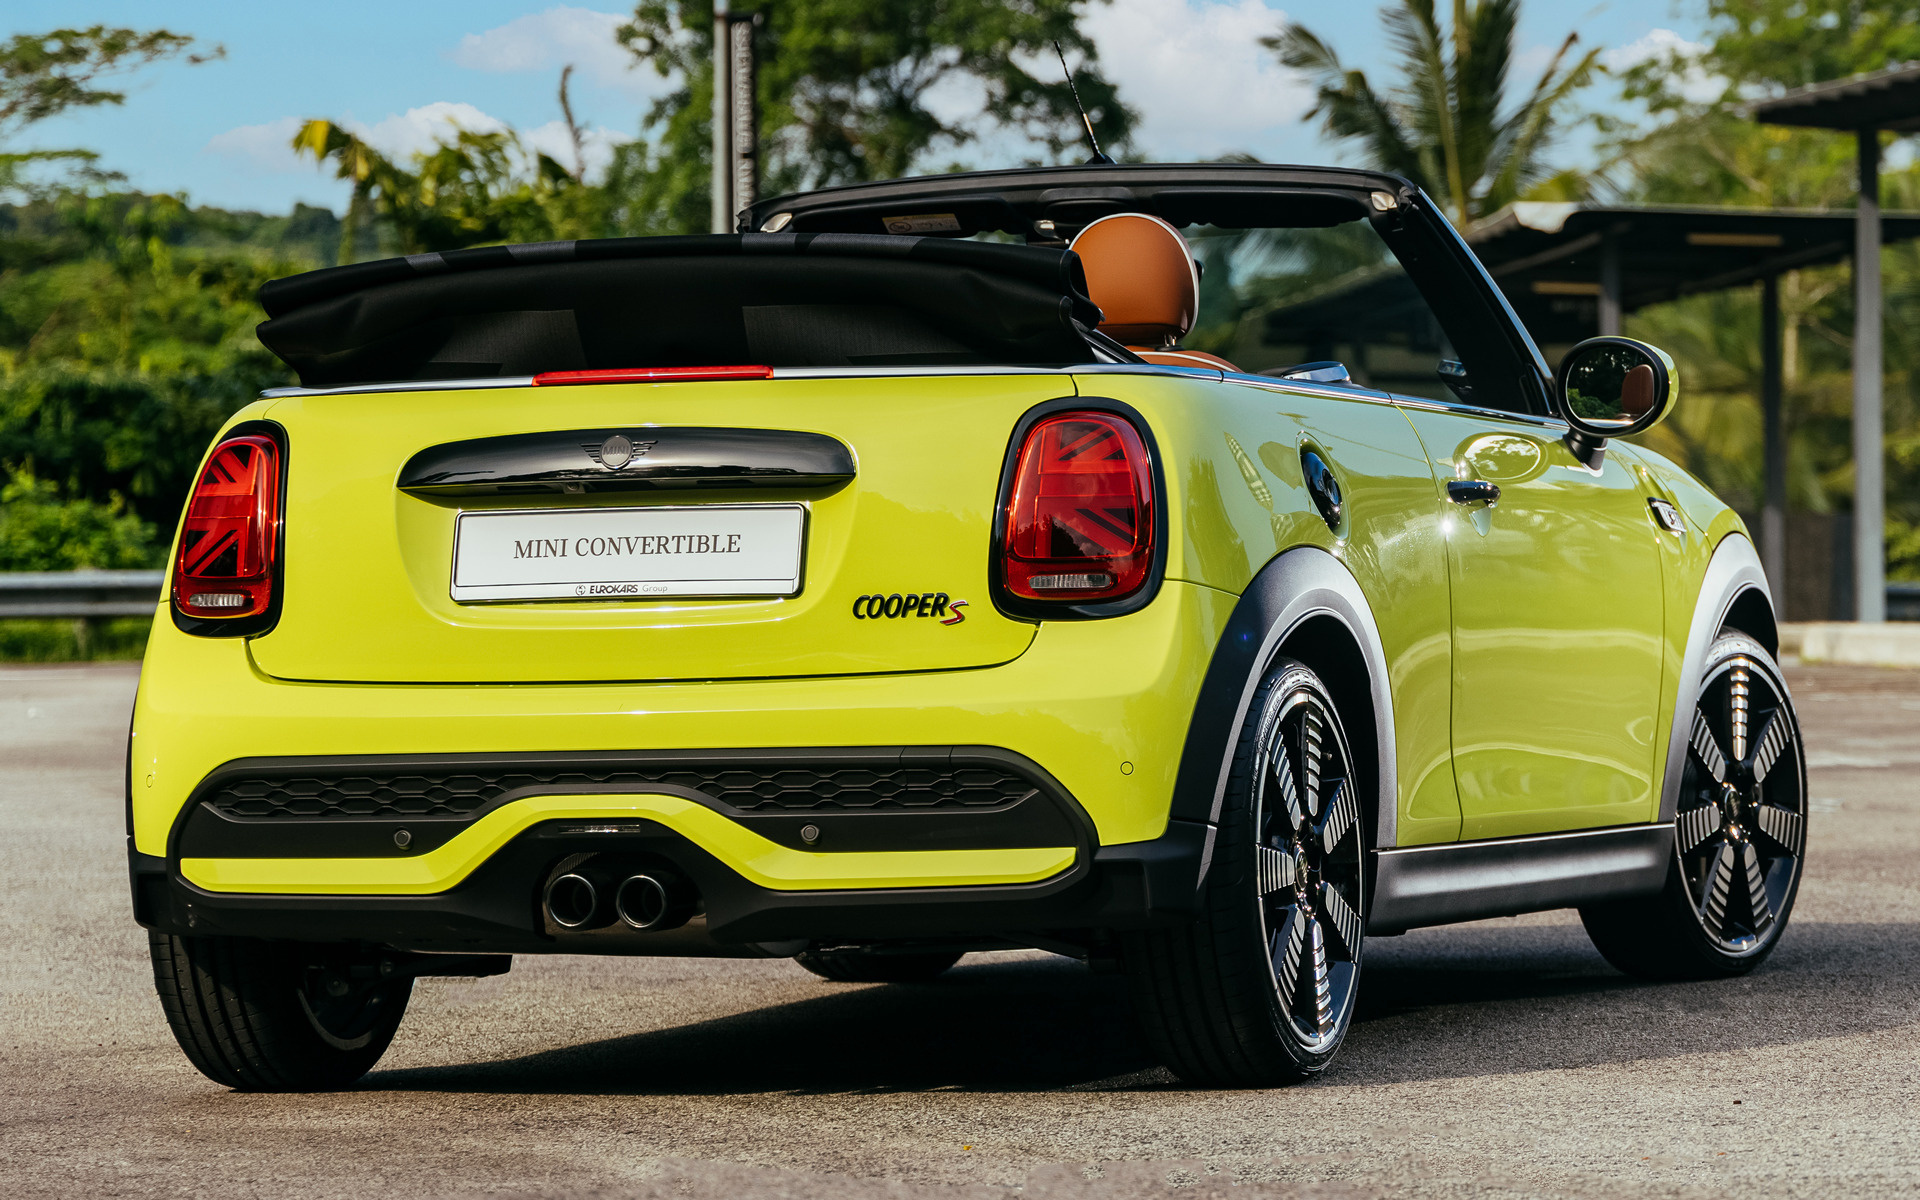 MINI Convertible, Open-air driving, Stylish and compact, Fun on the road, 1920x1200 HD Desktop